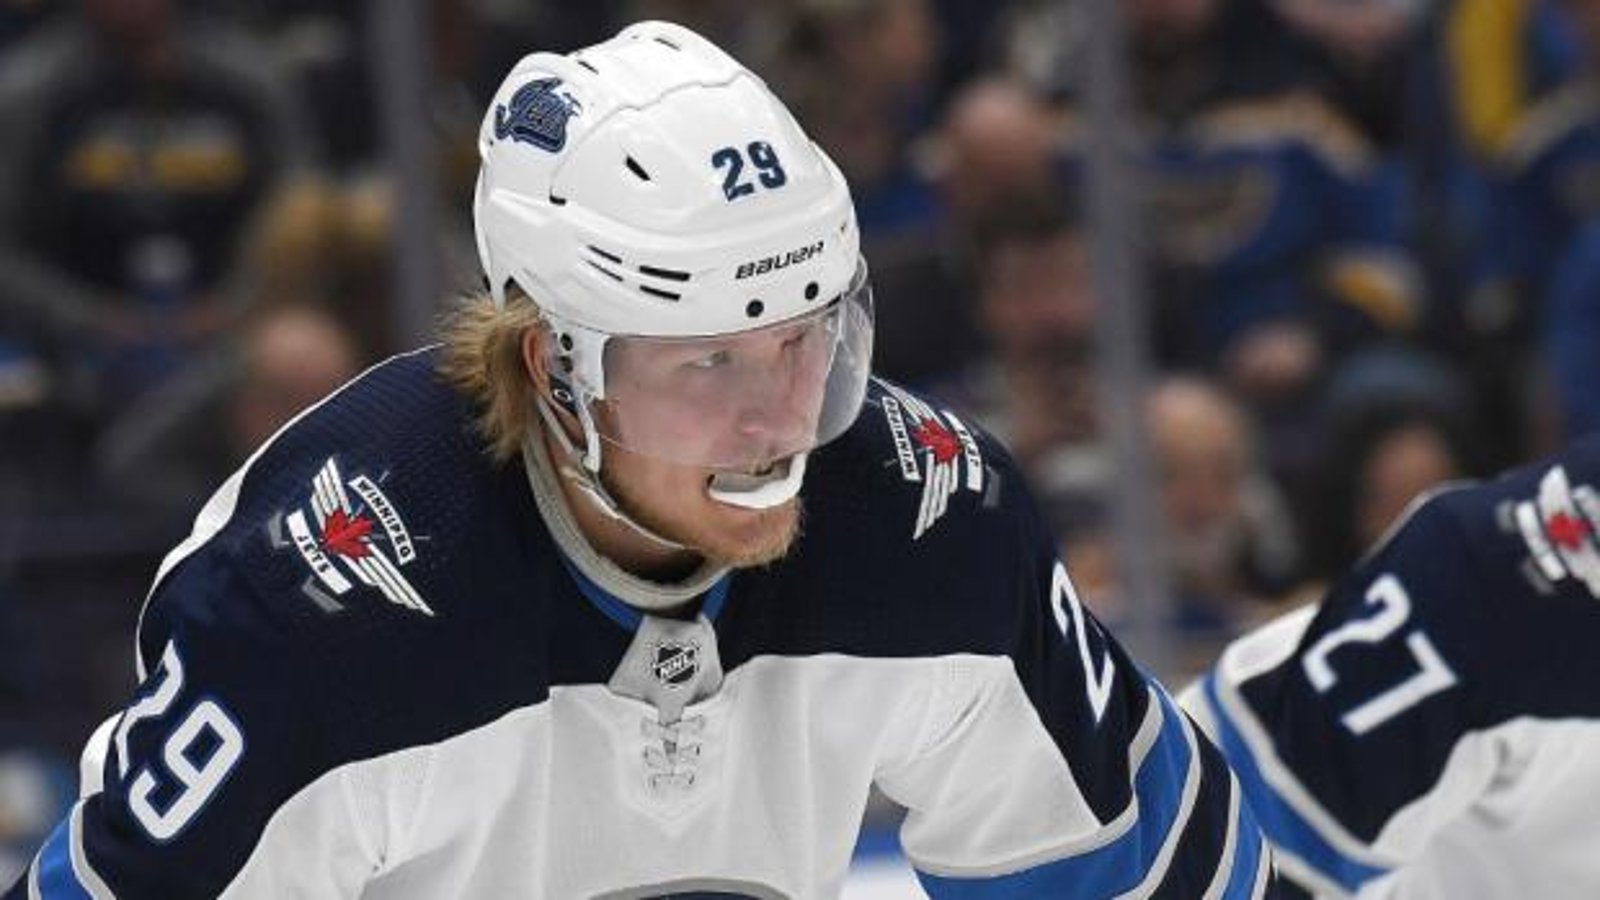 Breaking: Laine has found another team